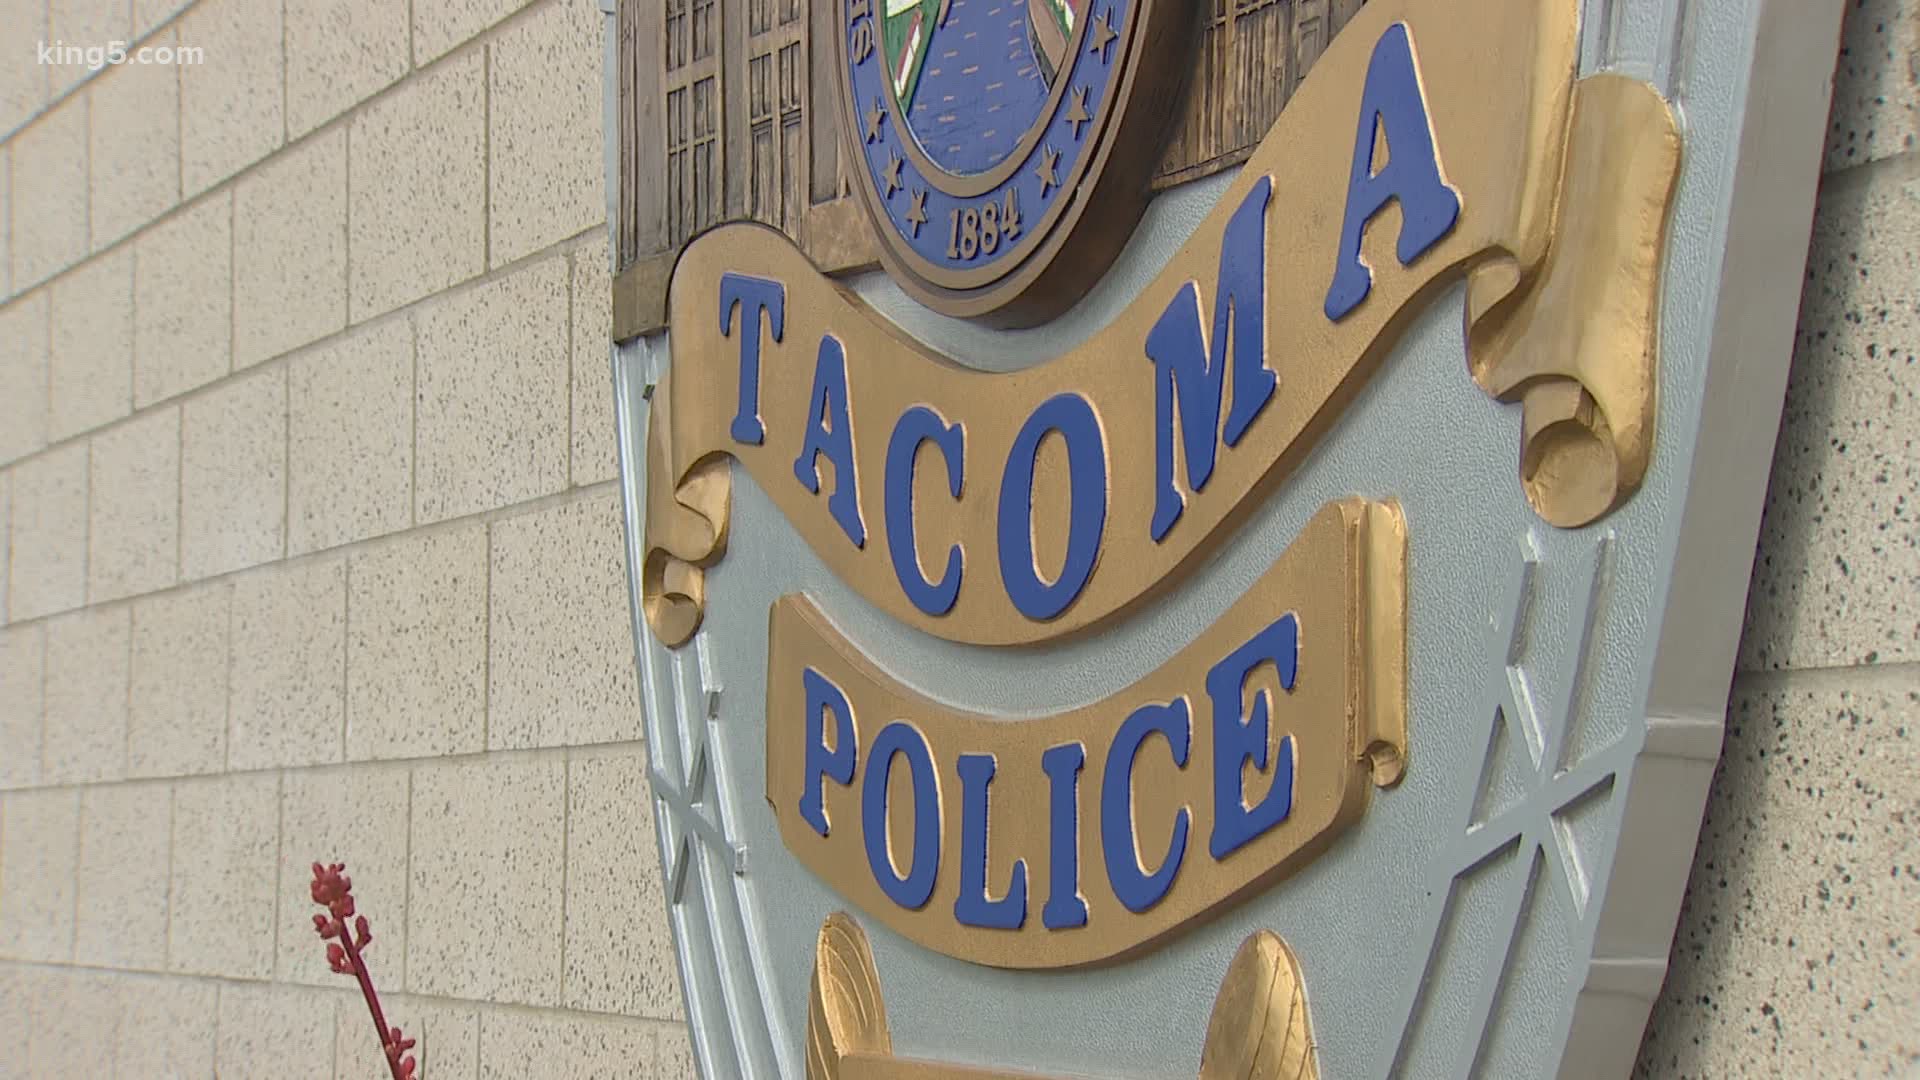 The chief's letter comes as four Tacoma Police officers are on leave and under investigation after the killing of Manuel Ellis.